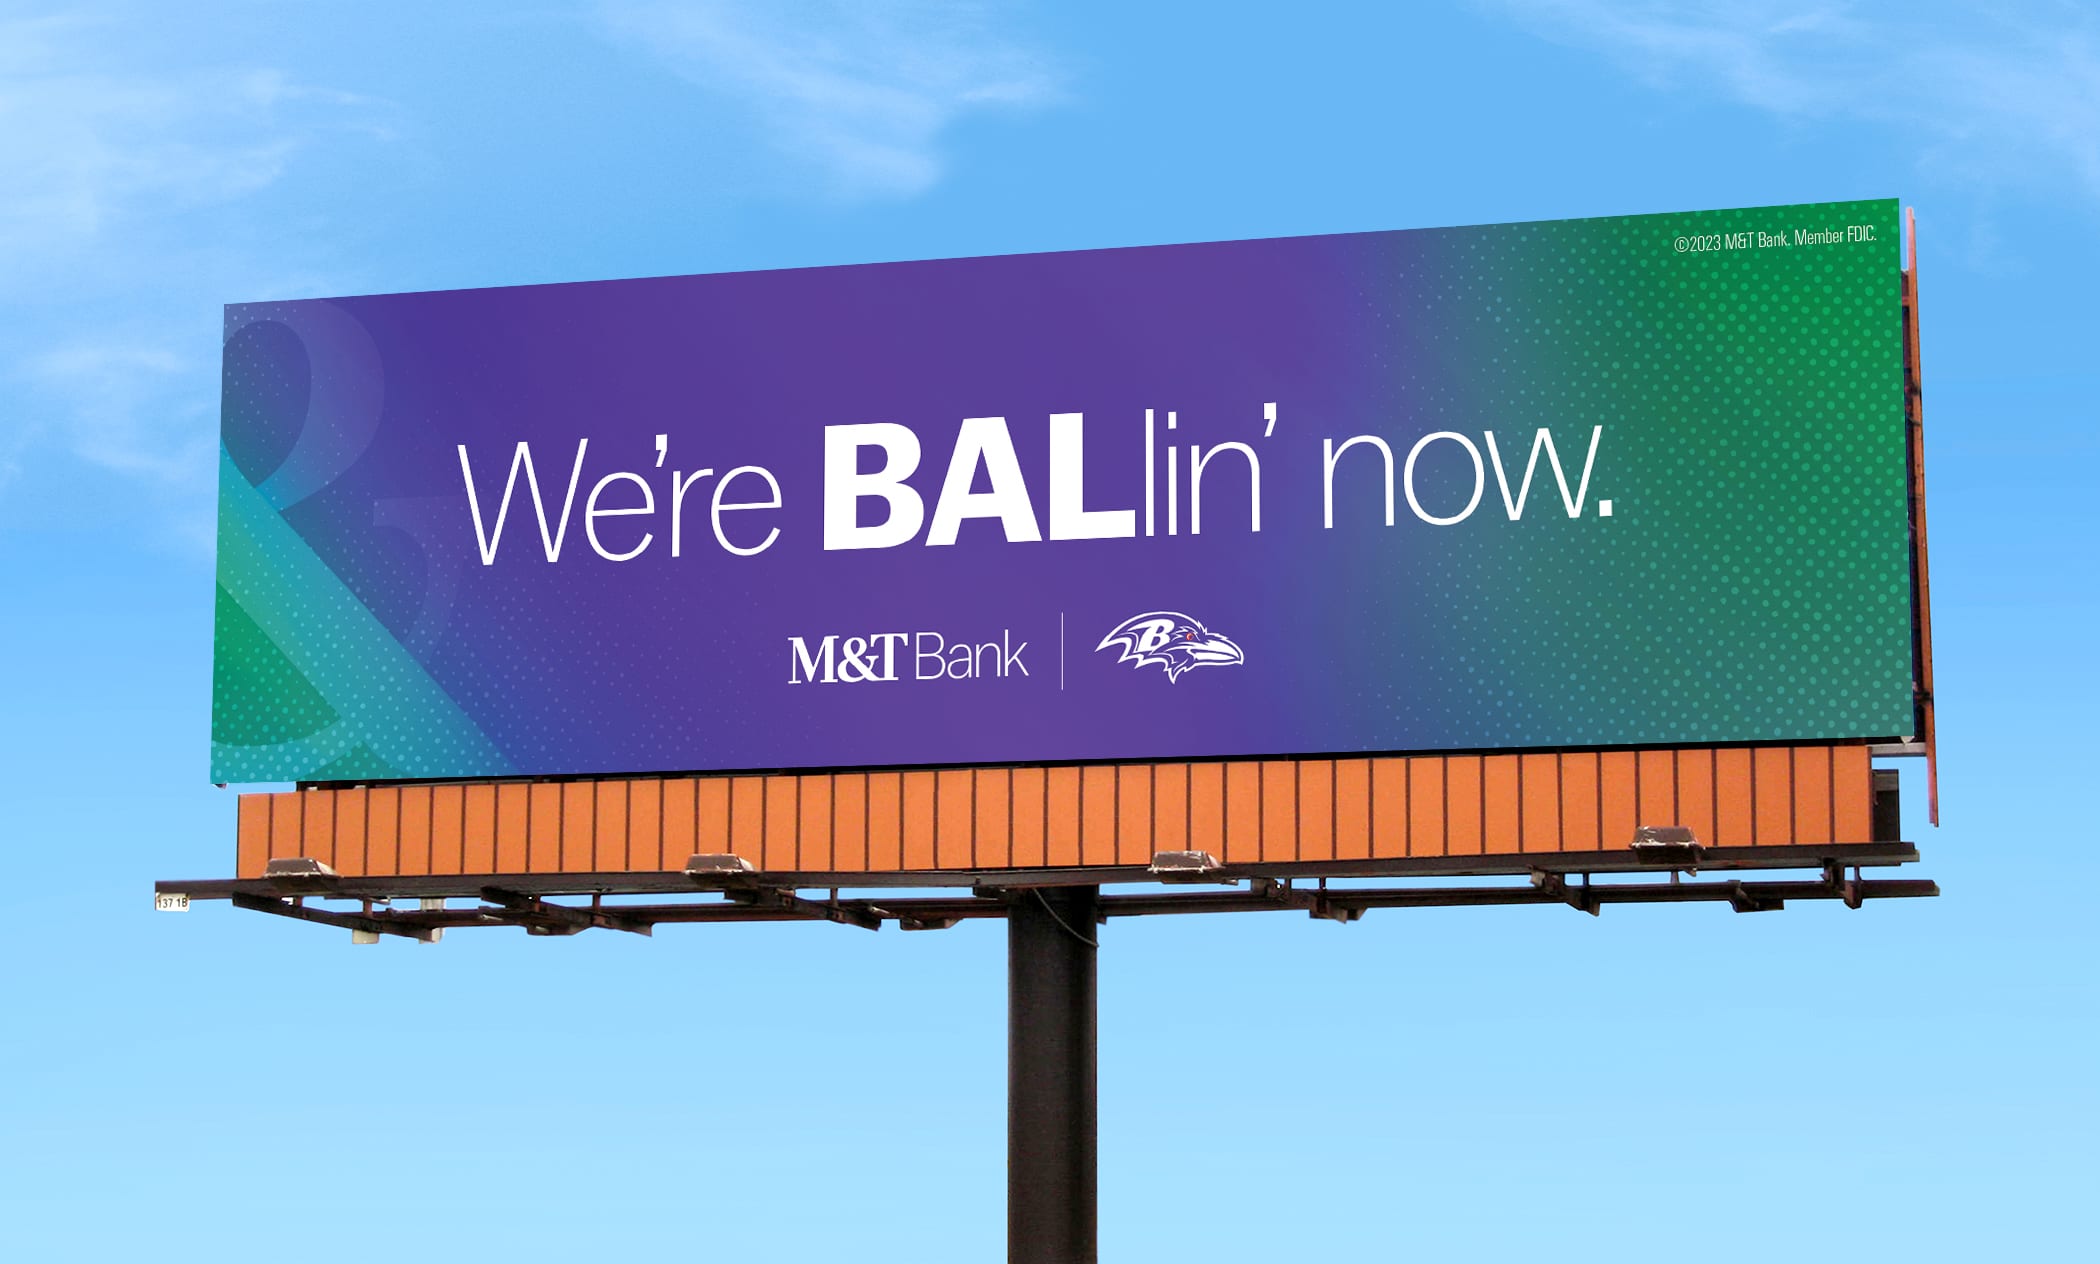 We're Bal-lin now.